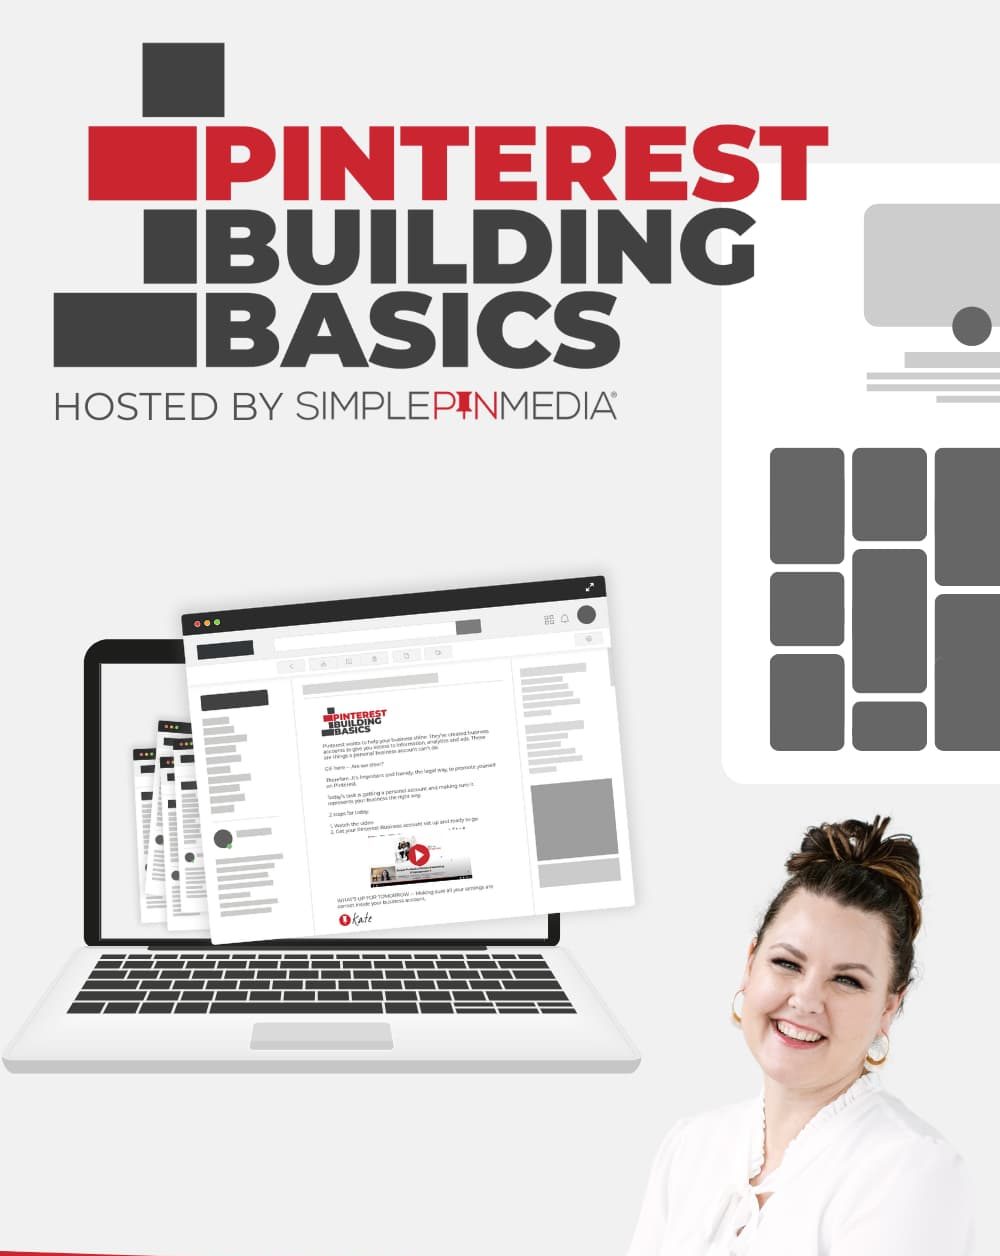 laptop screen with smiling woman - text "pinterest building basics, join this free email challenge to learn how to set up your business on pinterest in less than a week".